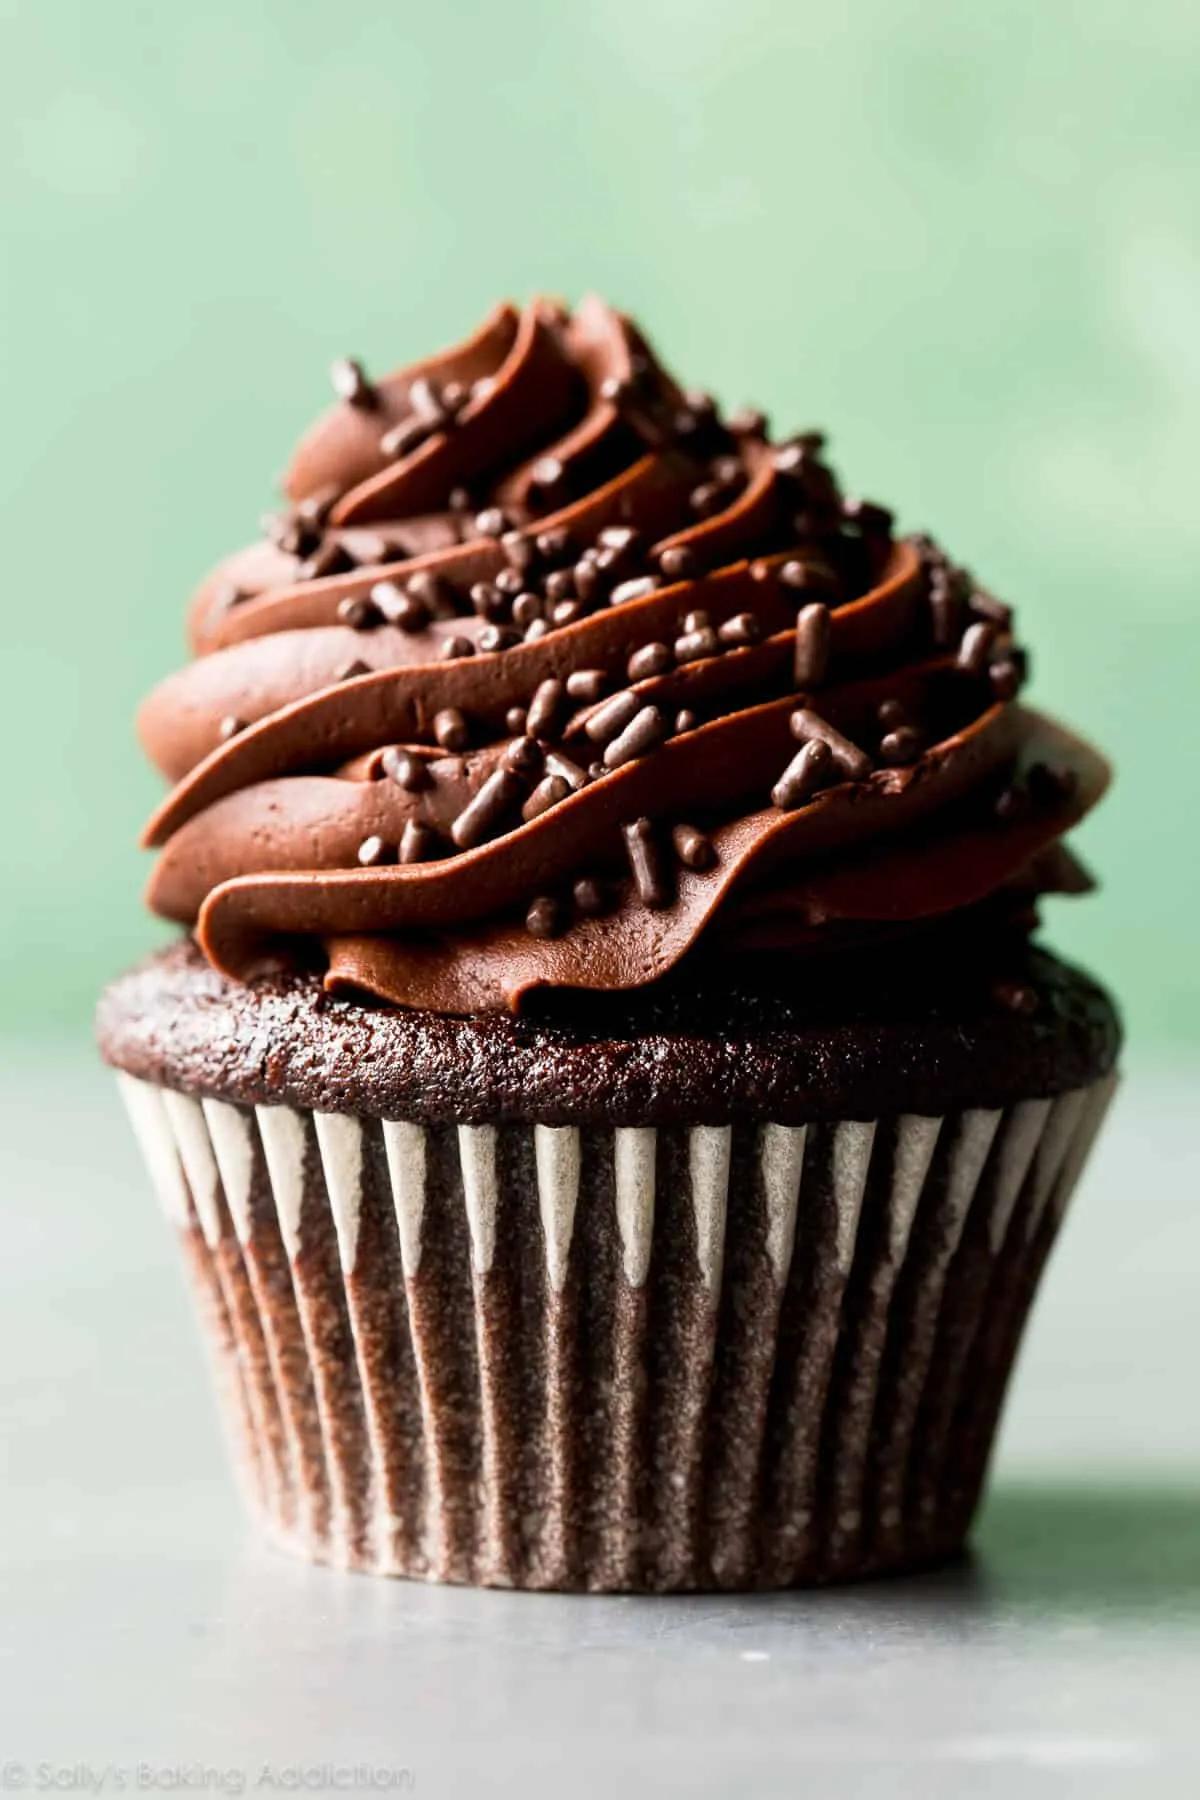 Classic Chocolate Cupcakes with Vanilla Frosting. - Sallys Baking Addiction